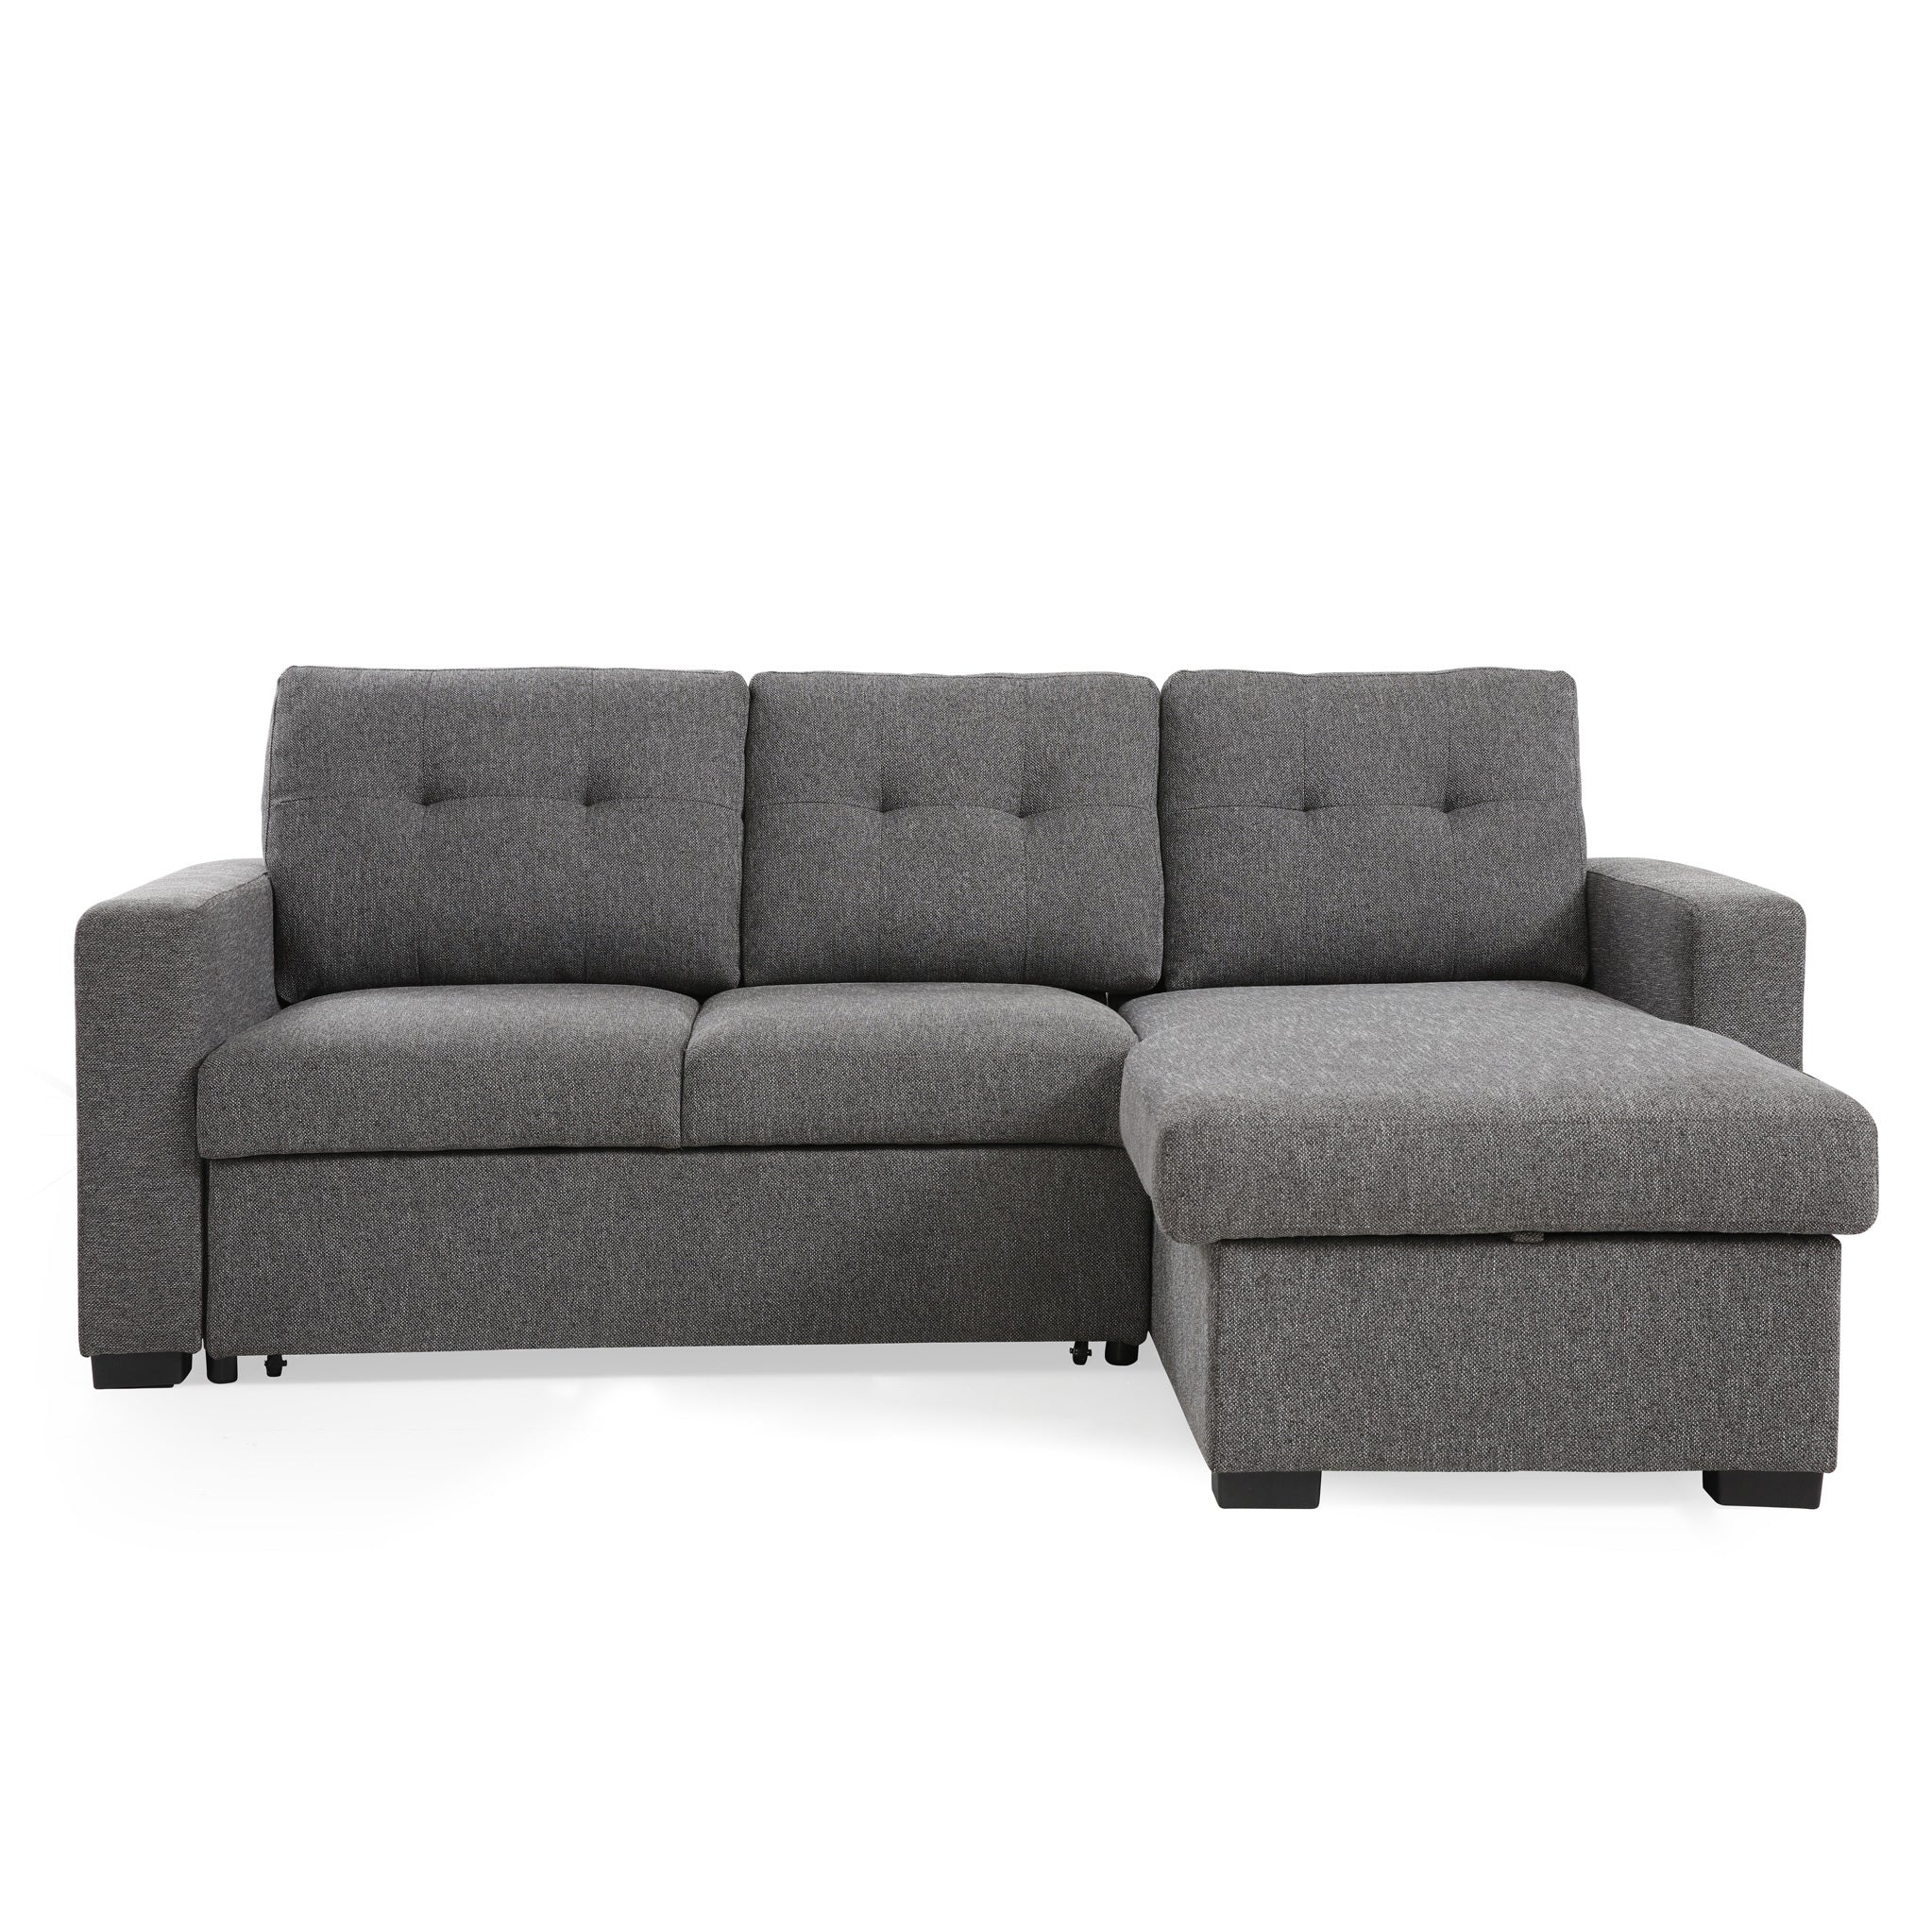 Bosworth 3 Seater Chaise Pop Out Sofa Bed For Living Room Roseland